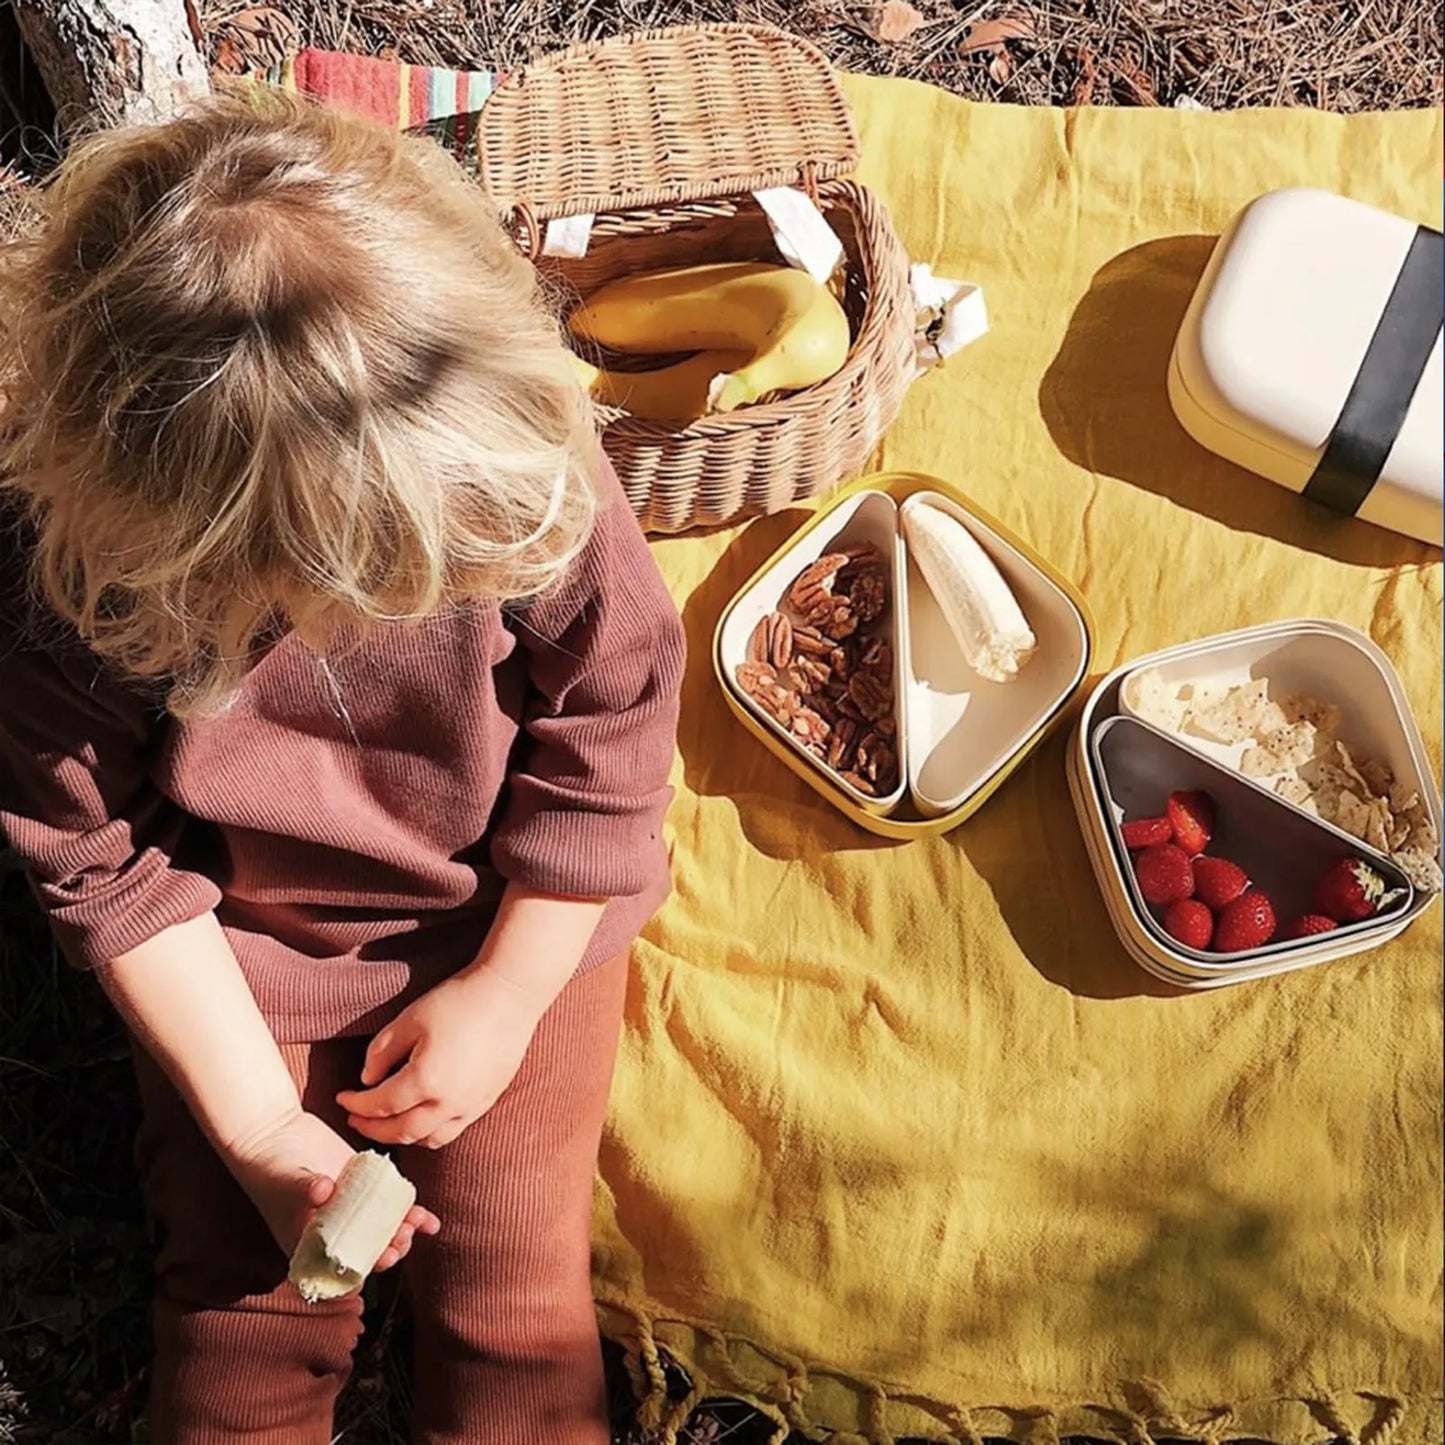 Child on a yellow picnic blanket with bento boxes and food.